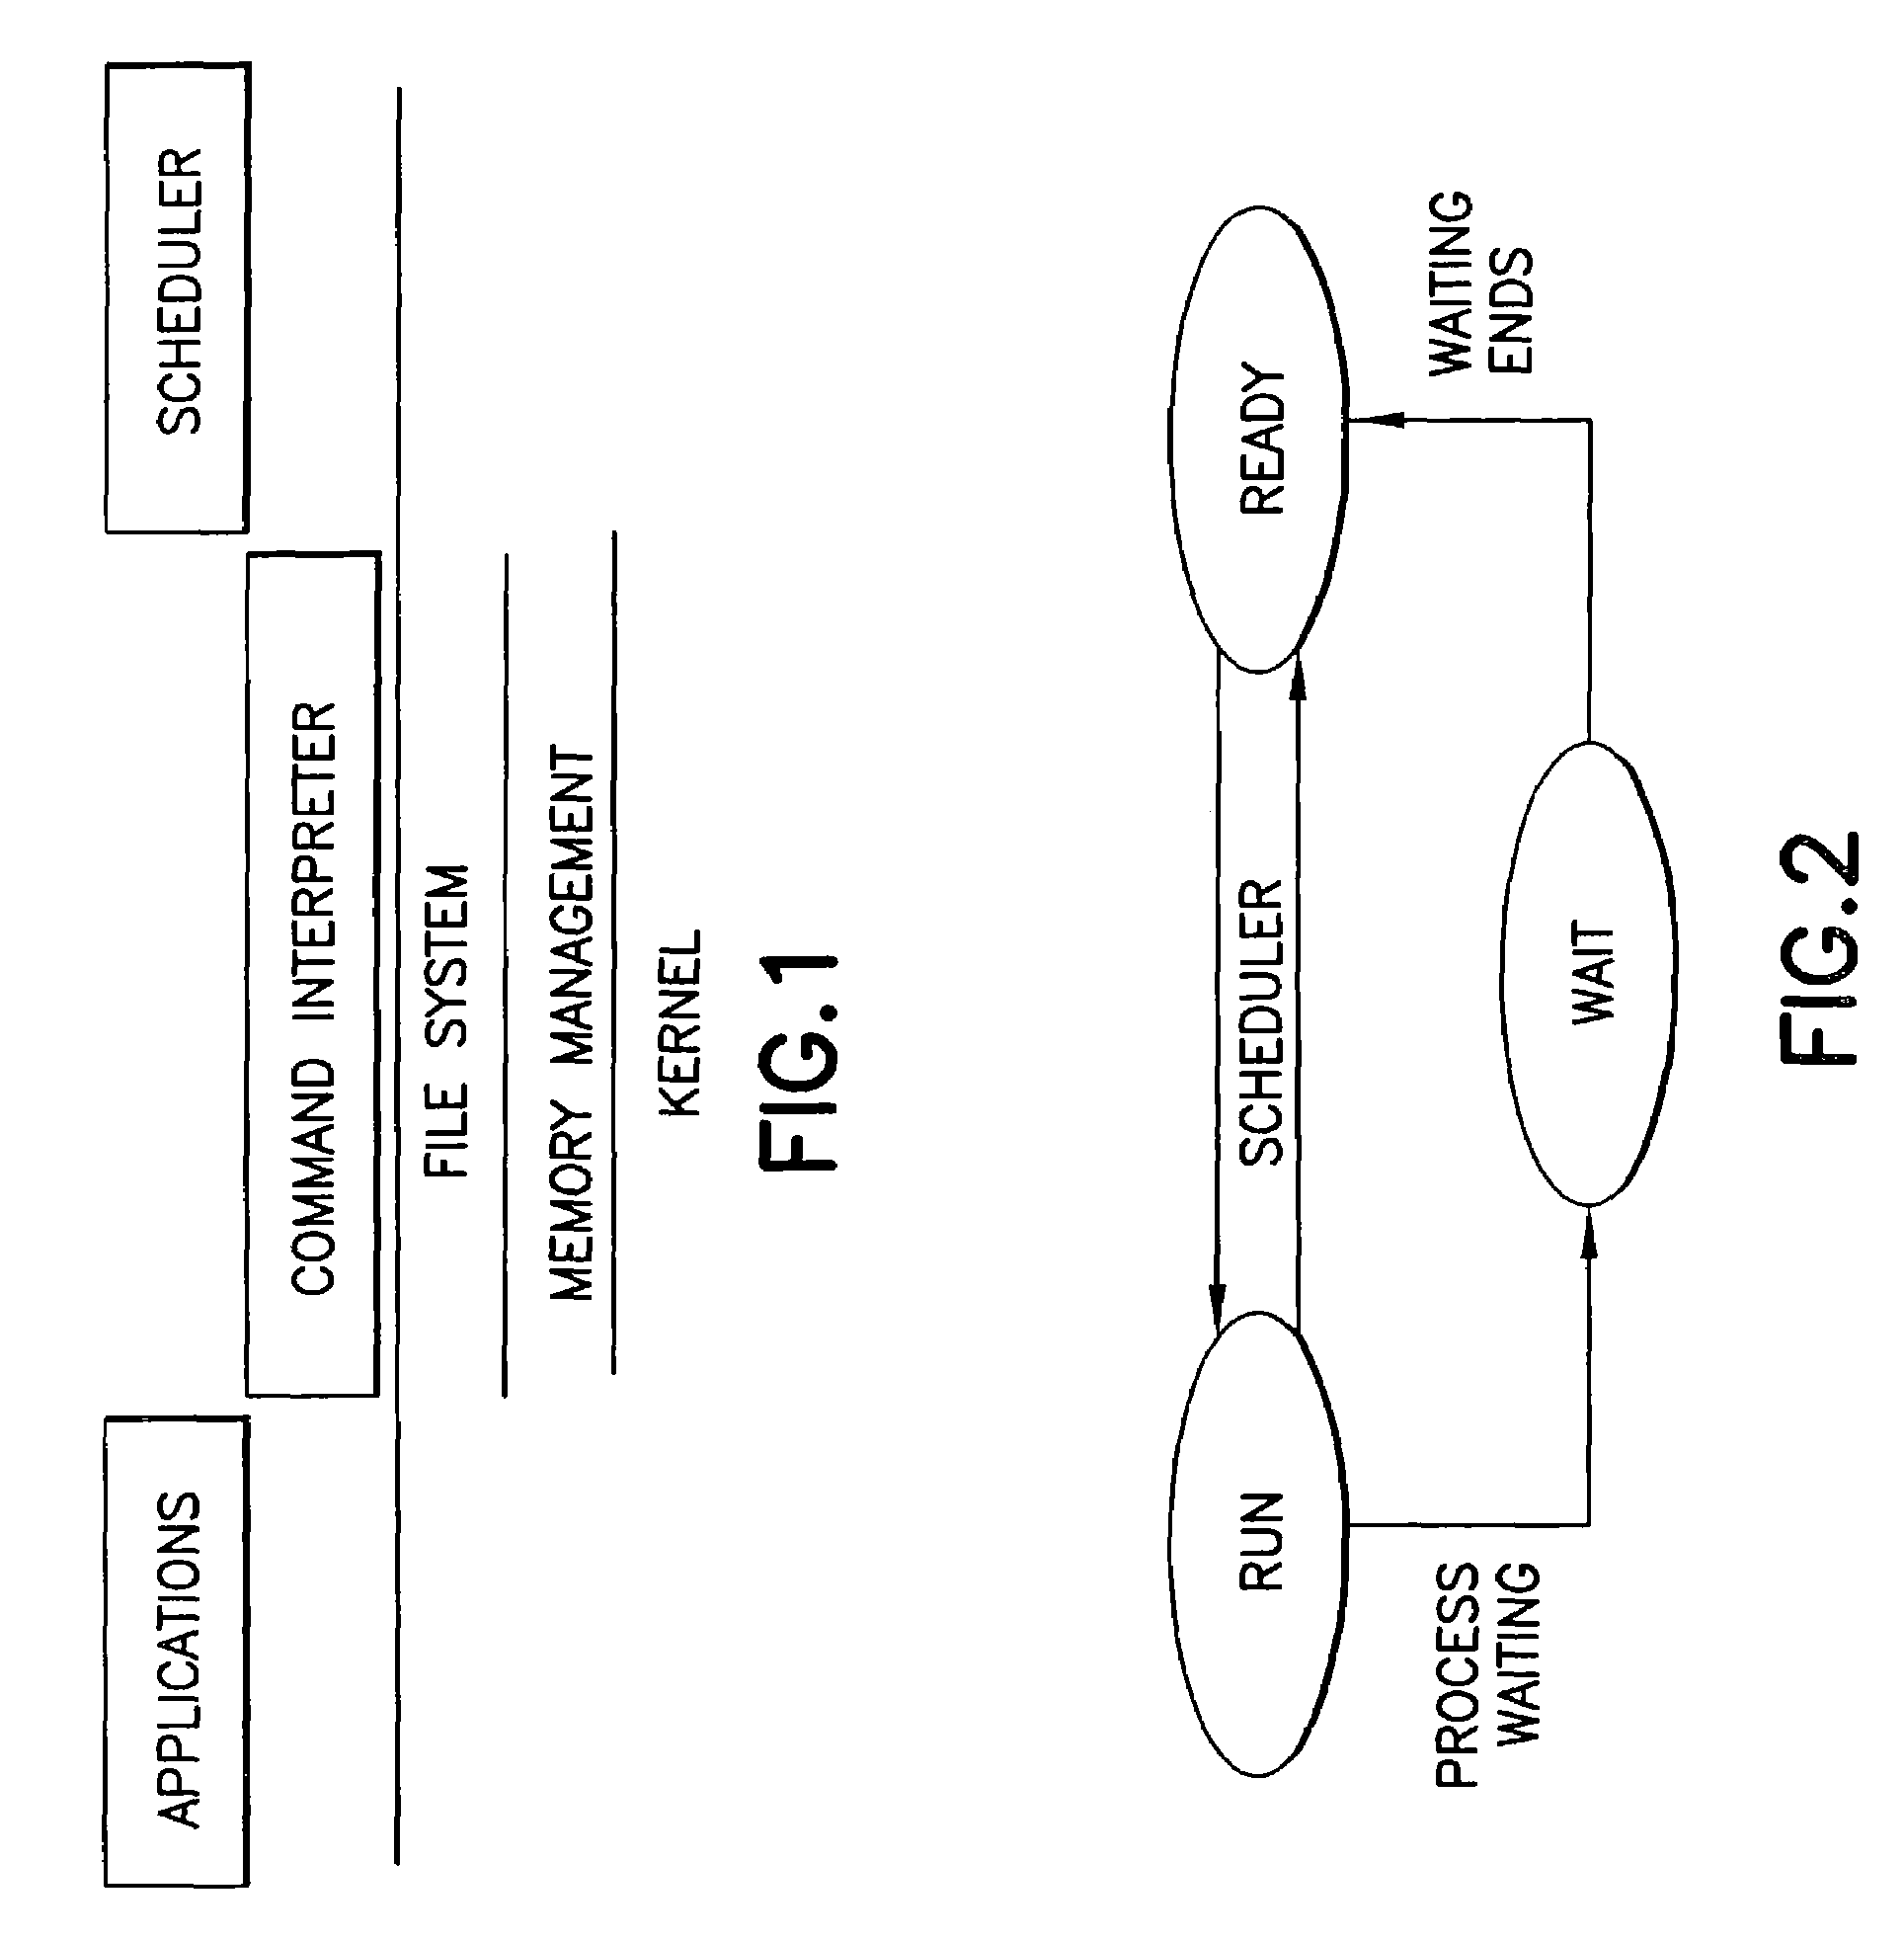 Embedded system with interrupt handler for multiple operating systems